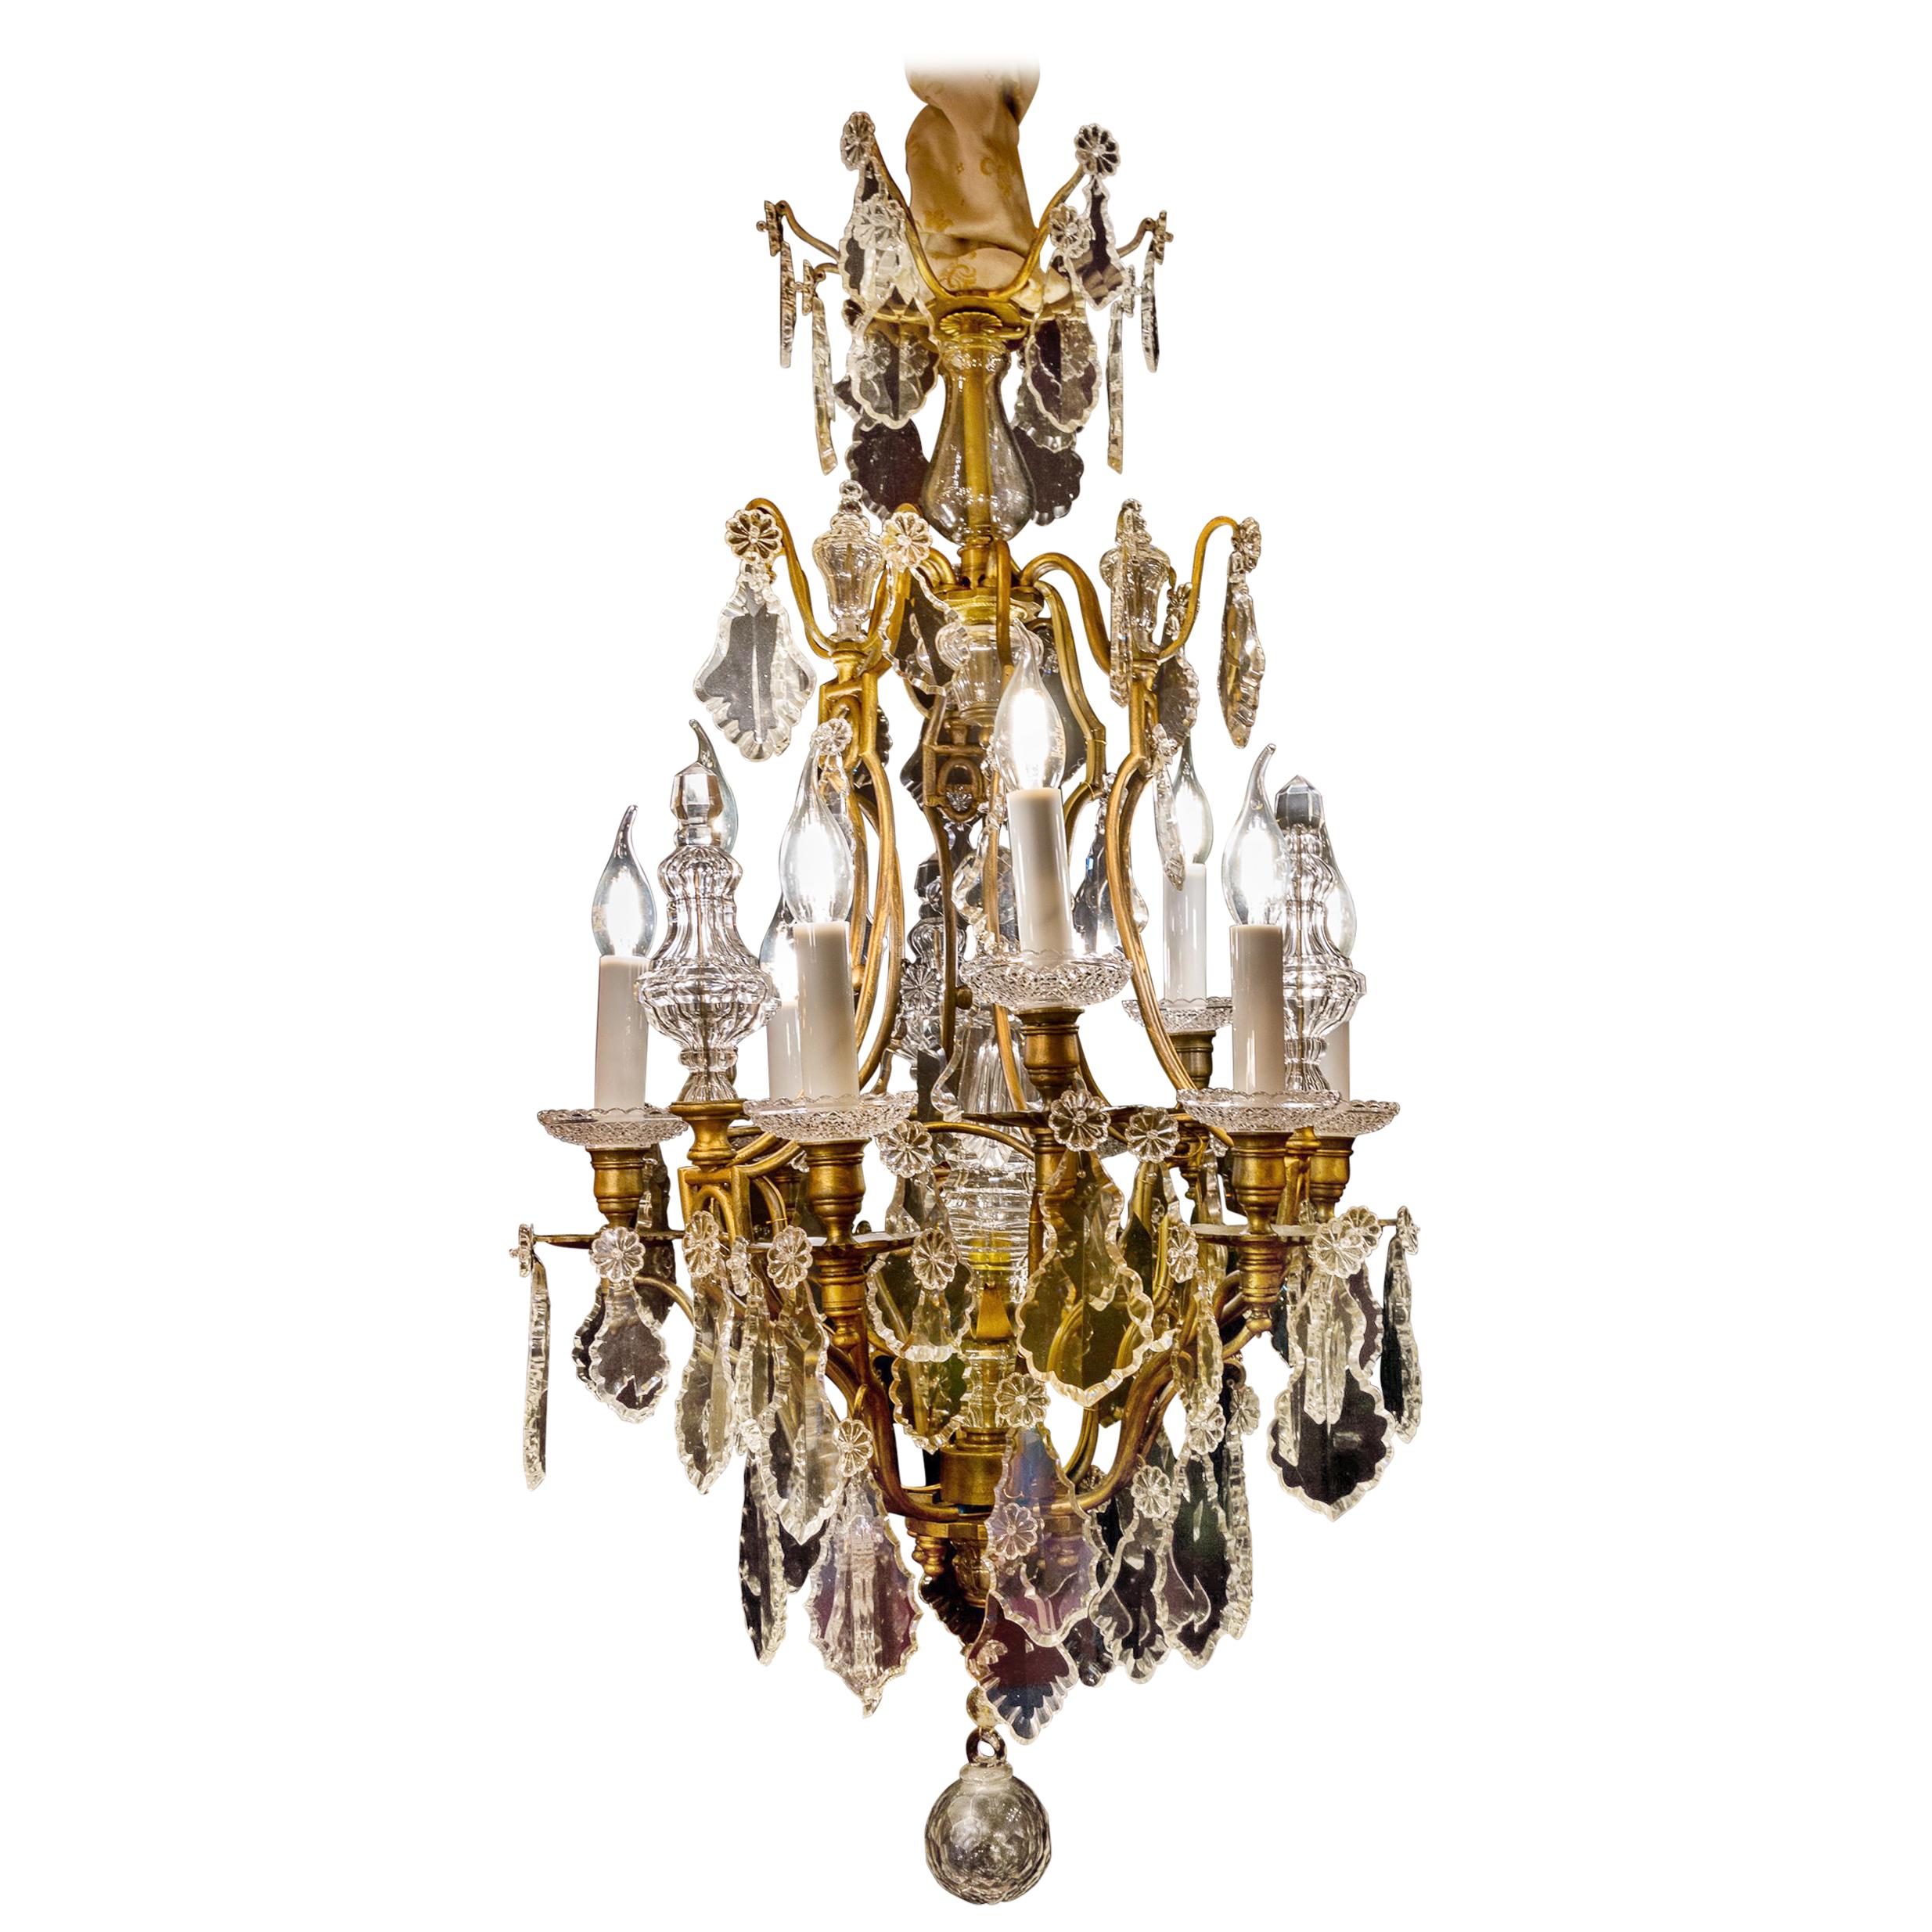 By Baccarat, French Louis XV Style, Gilt-Bronze and Cut-Crystal Chandelier